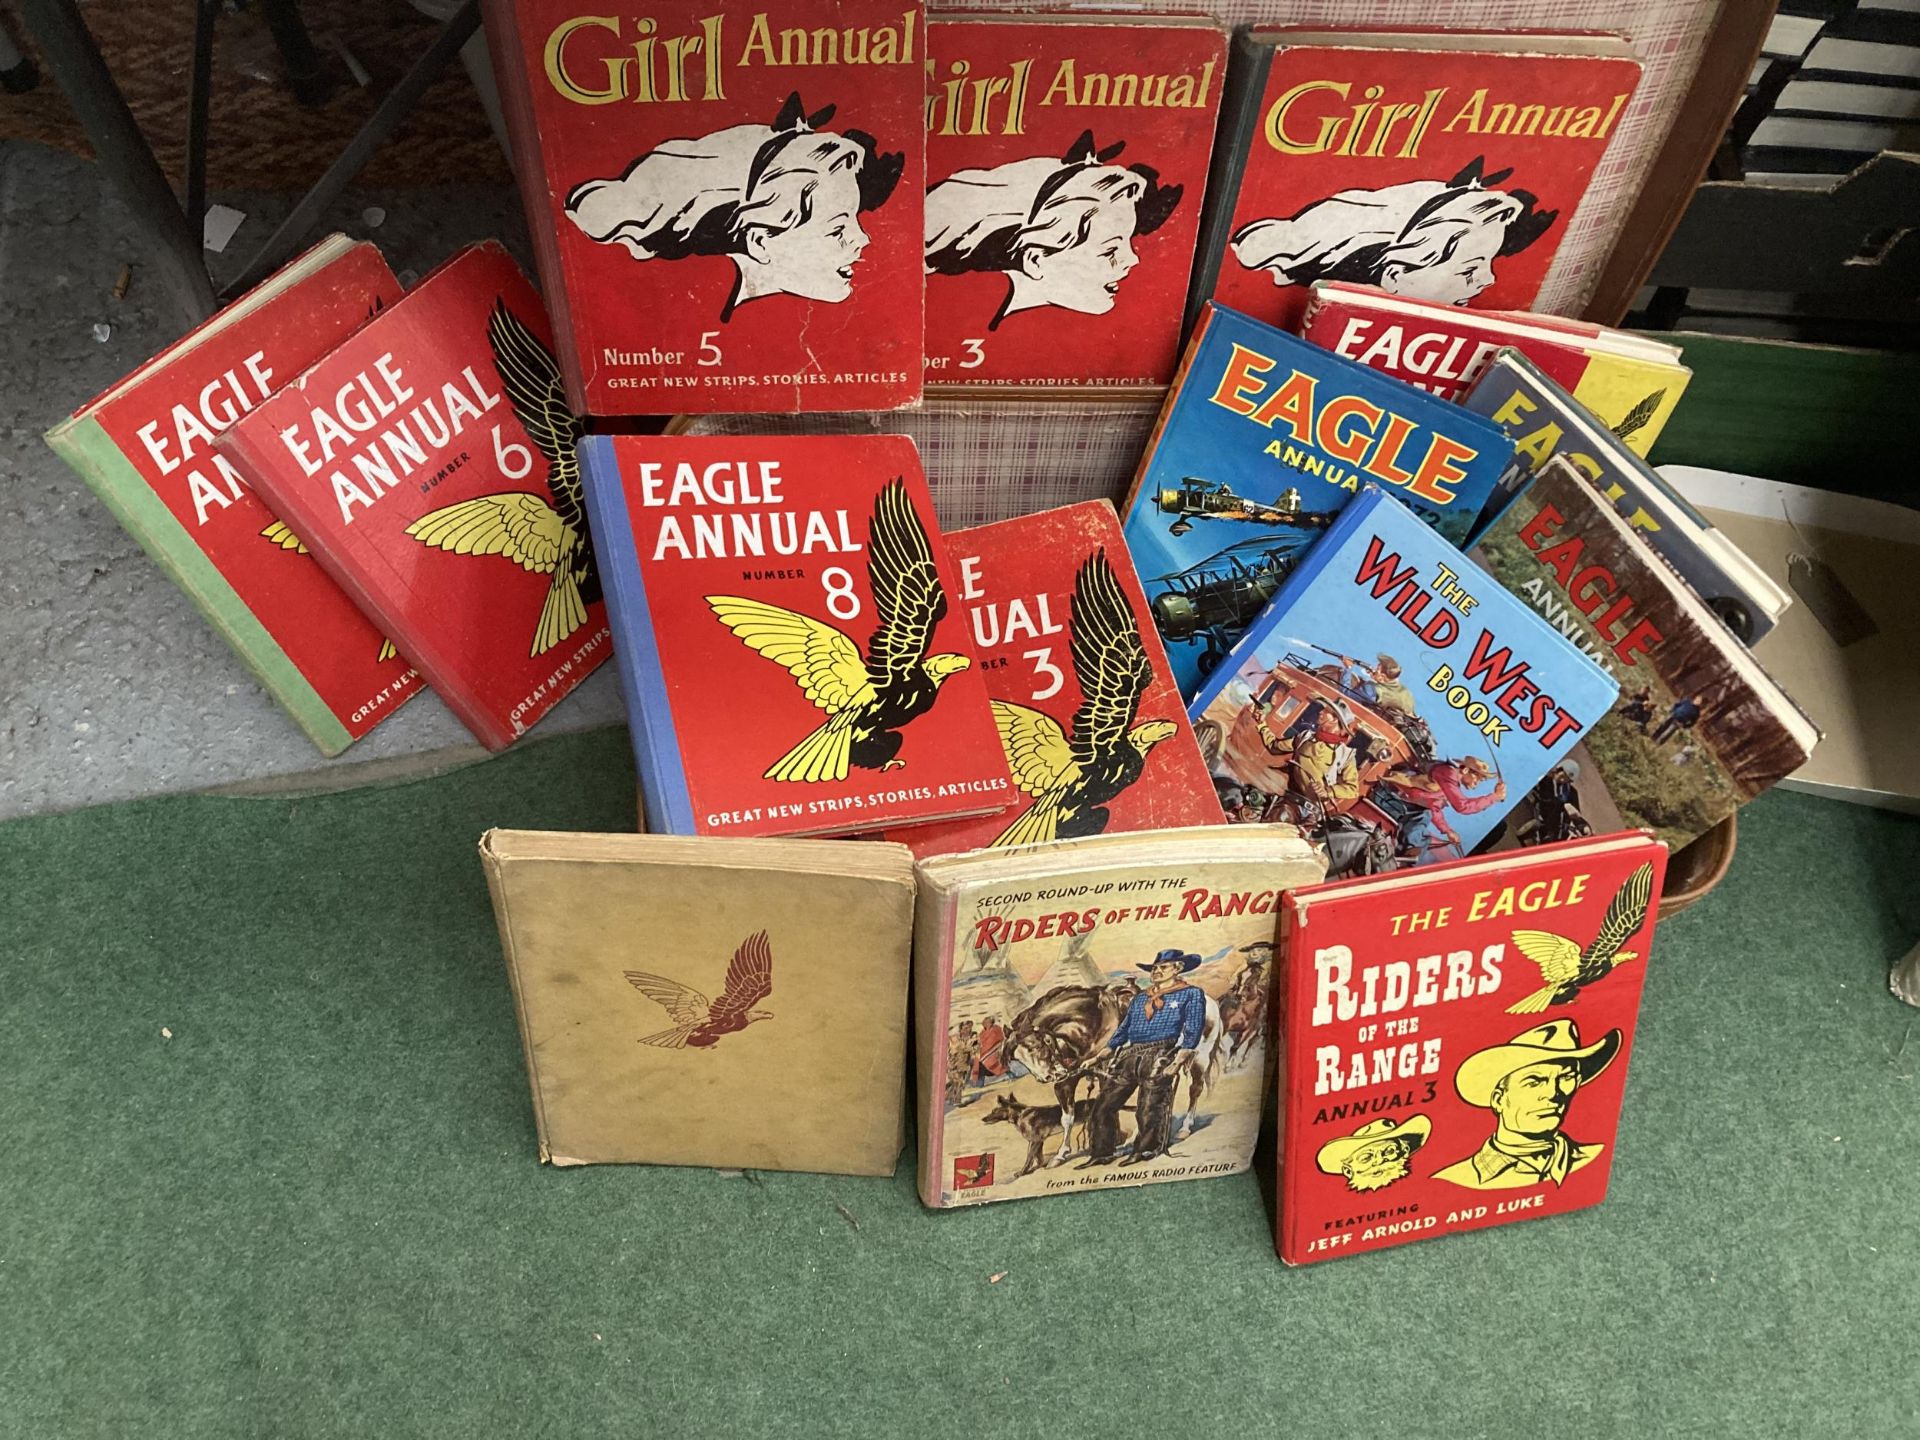 A COLLECTION OF VINTAGE EAGLE AND GIRL ANNUAL BOOKS